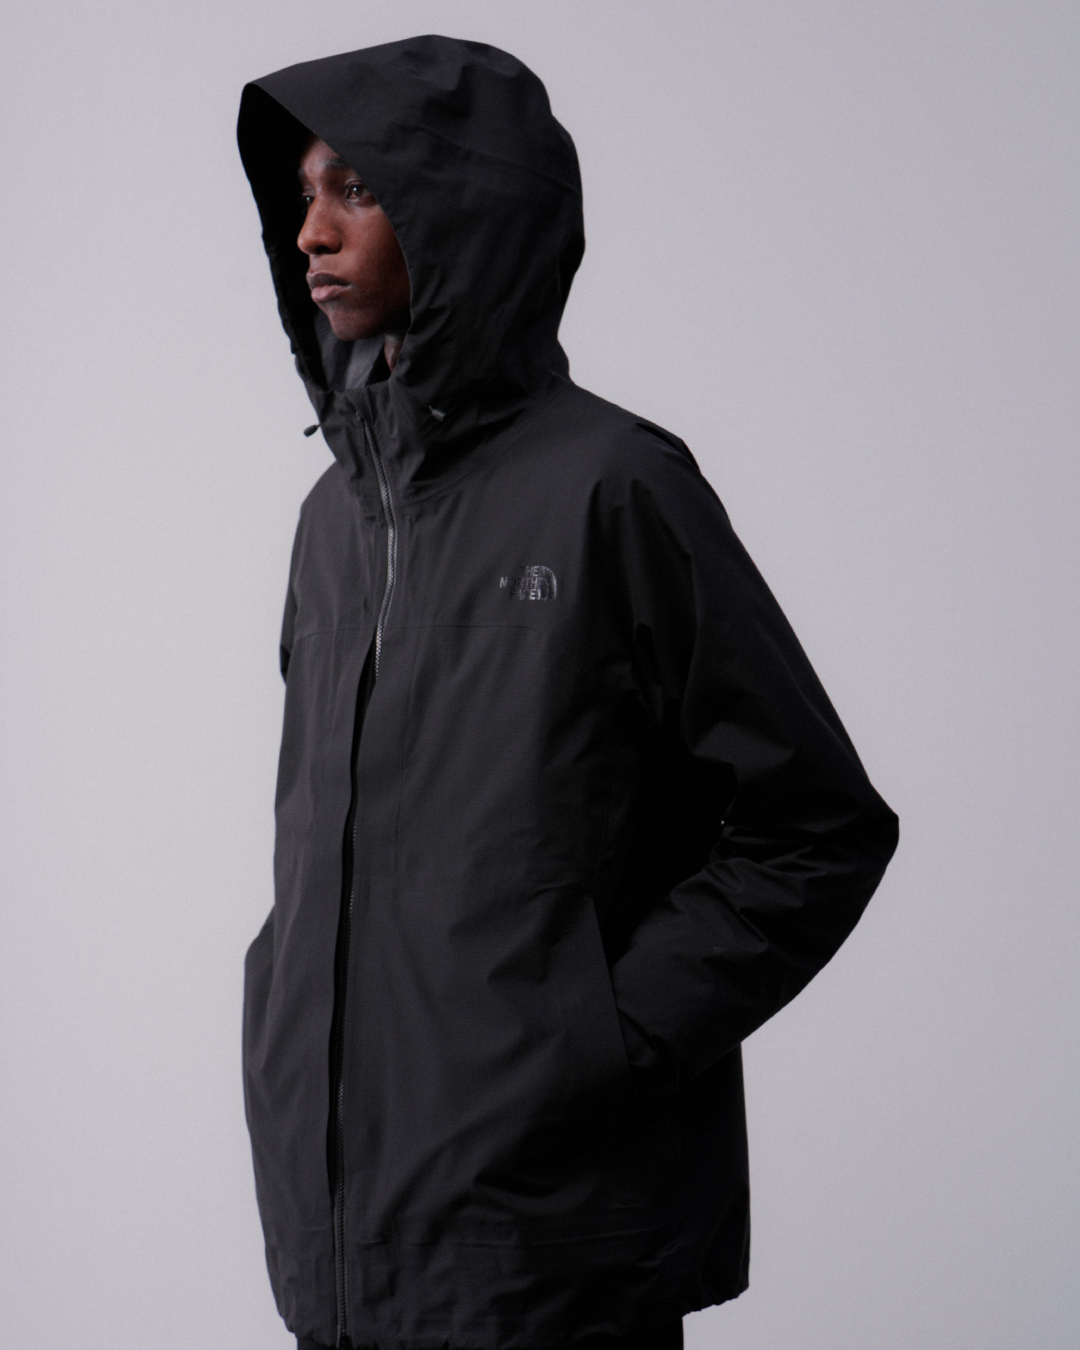 THE NORTH FACE「Urban Exploration」新作发布